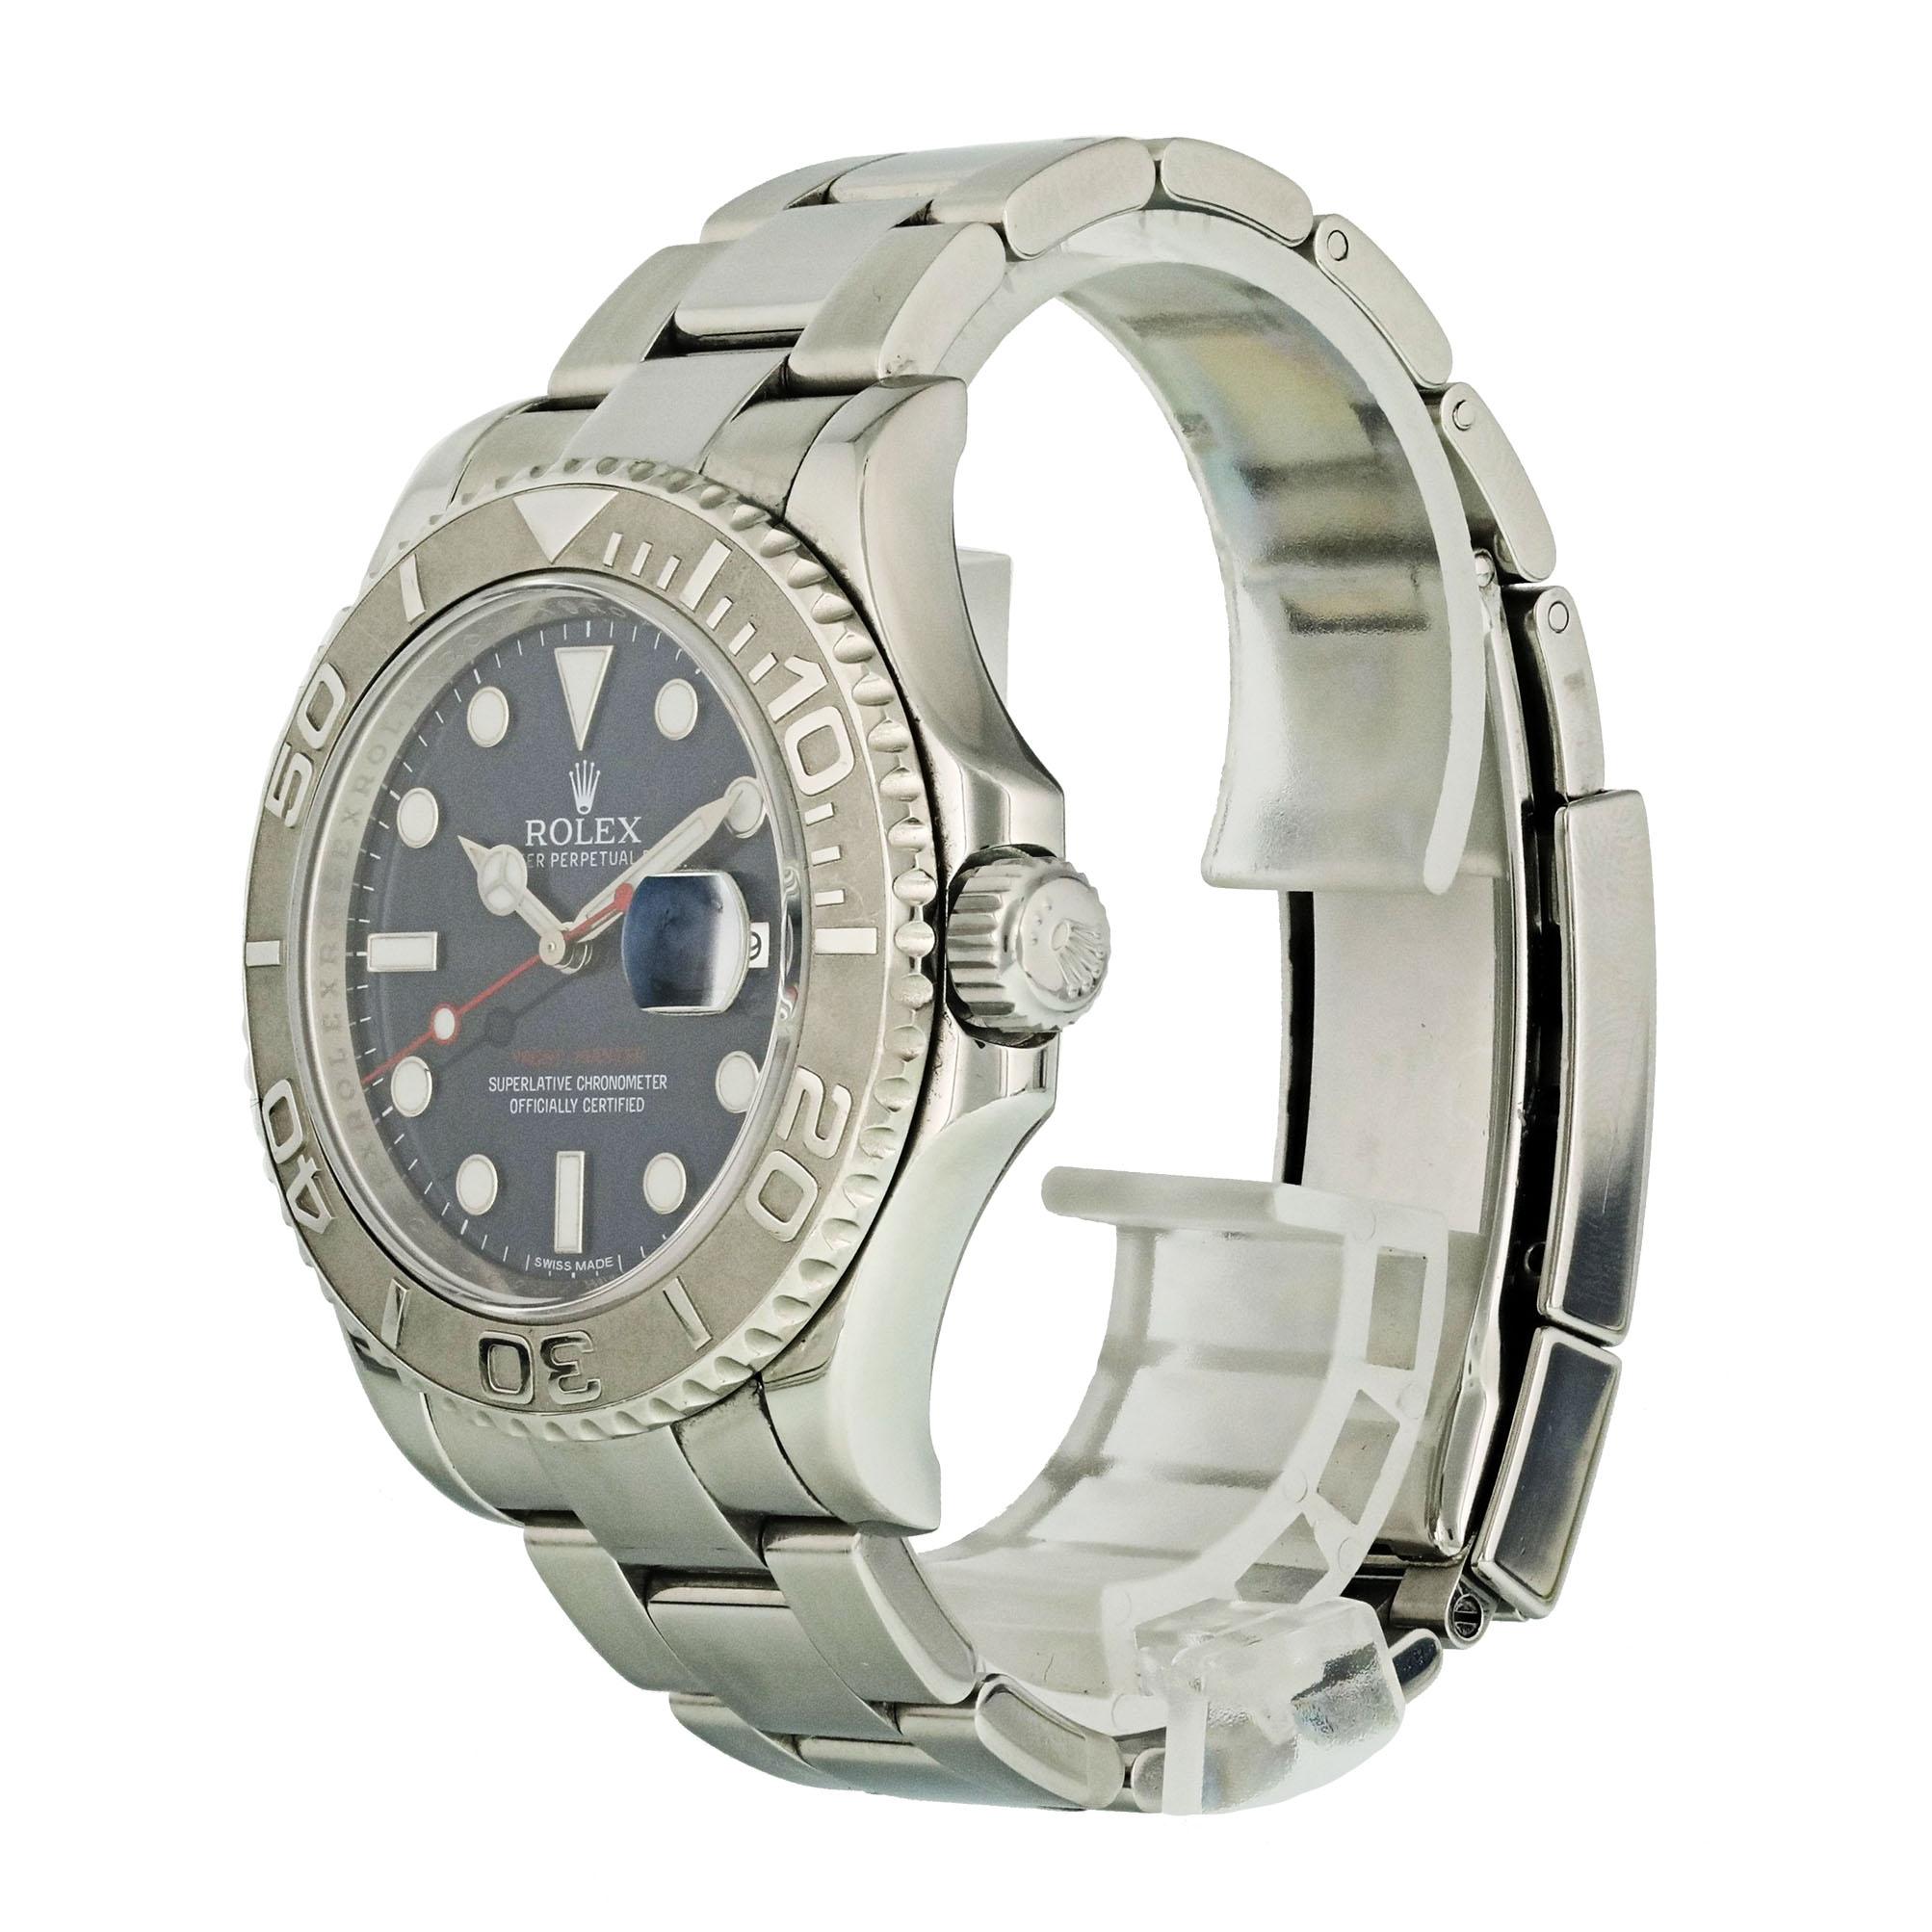 Rolex Yachtmaster 116622 Men Watch. 
40mm Stainless Steel case. 
Platinum Bidirectional bezel. 
Blue dial with Luminous Steel hands and index, dot hour markers.. 
Minute markers on the outer dial. 
Date display at the 3 o'clock position. 
Stainless